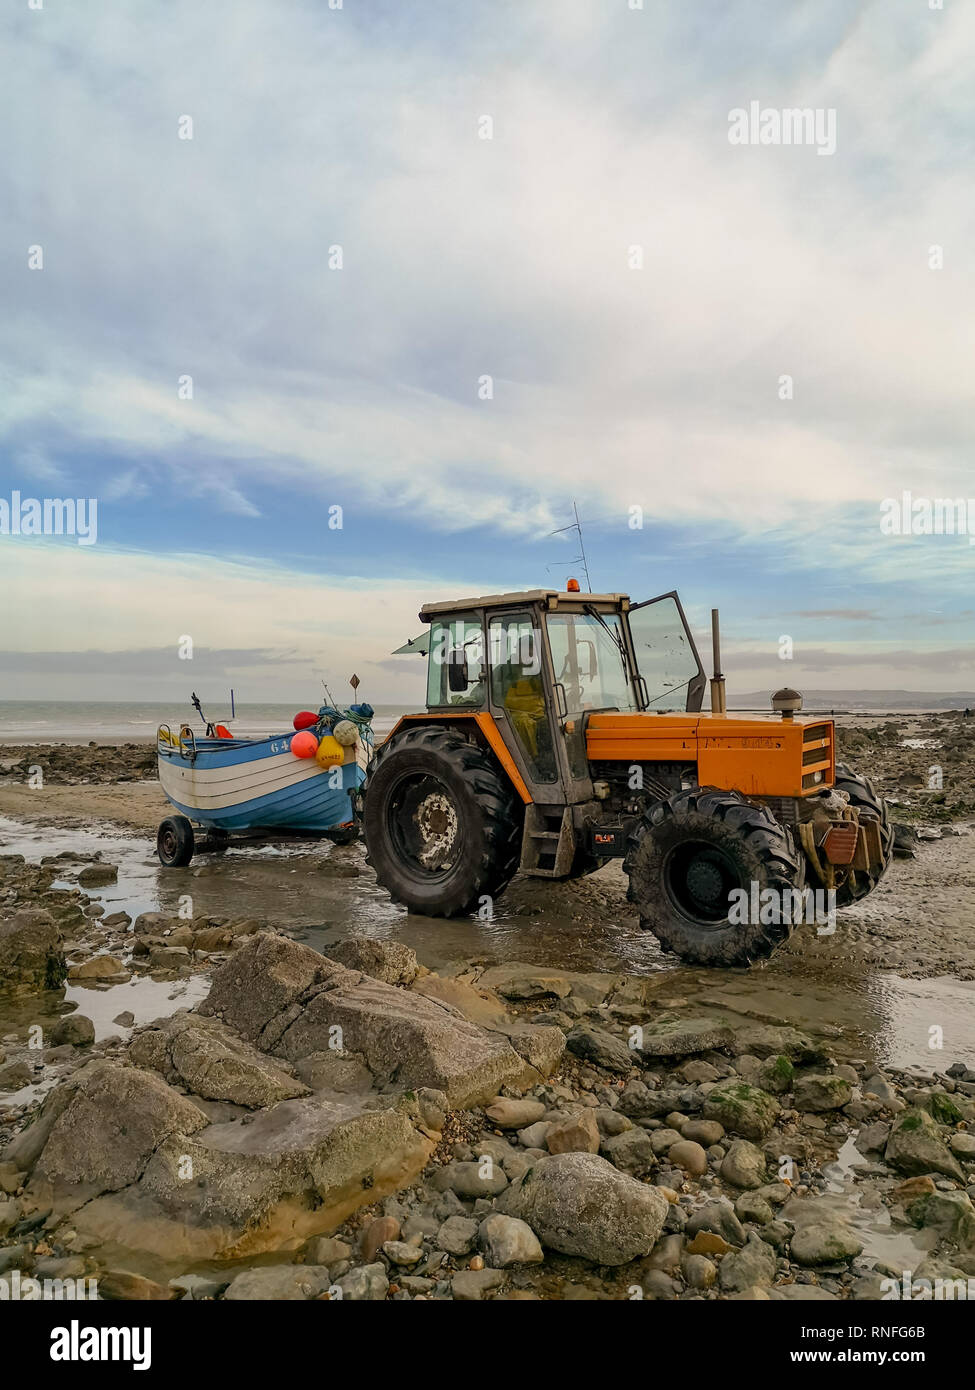 December 2018 - Wissant, France: Orange tractor towing a wooden white and blue fishing boat on a rocky beach during low tide Stock Photo